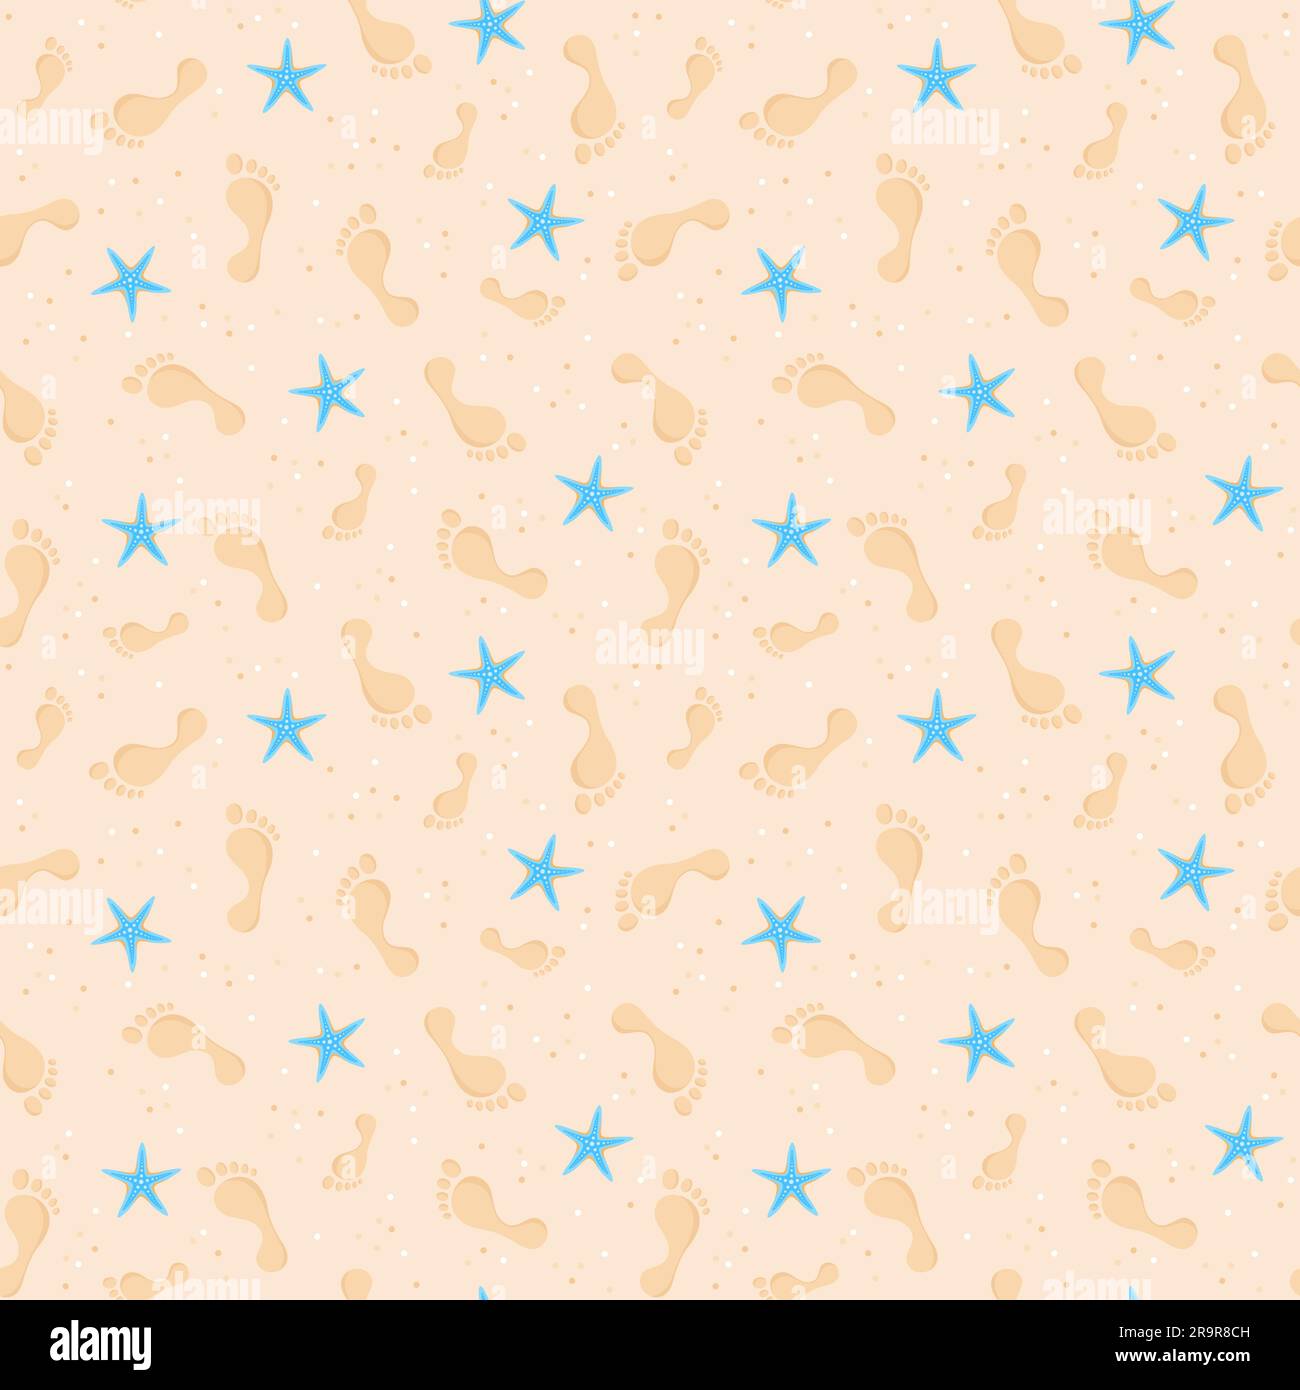 Seamless pattern of human footprints and starfish on the beach sand. Vector illustration in flat style Stock Vector